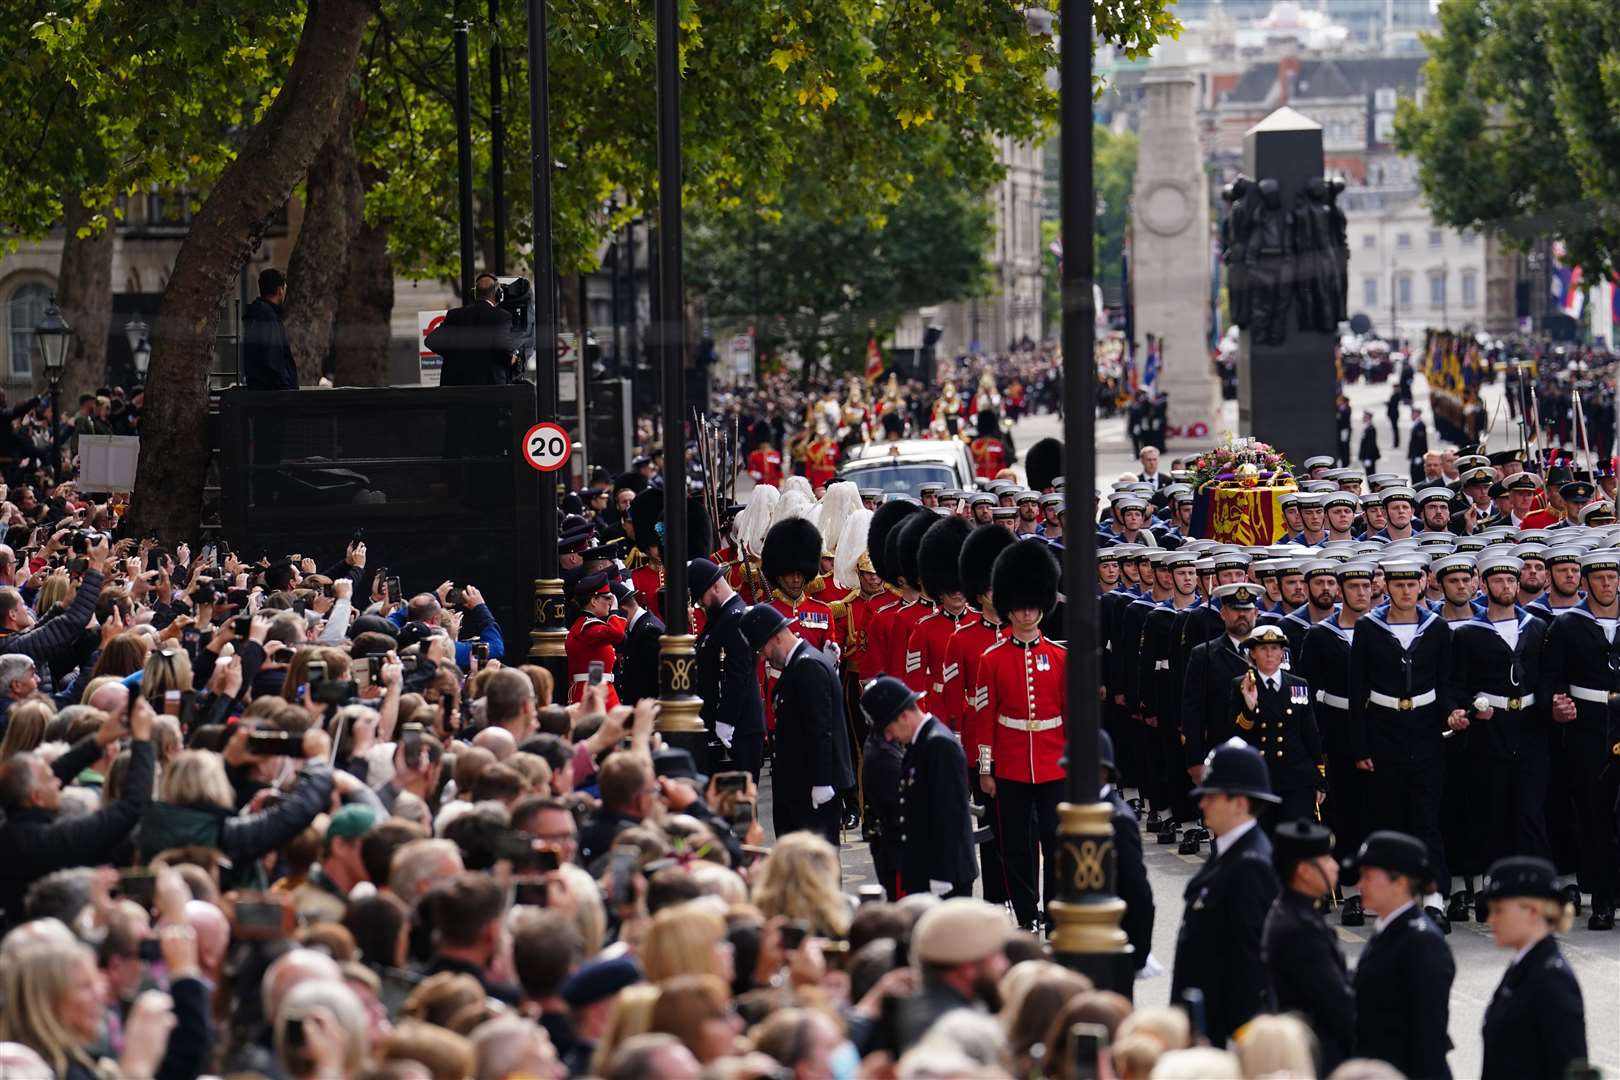 Crowds watch the Queen’s funeral procession (David Davies/PA)